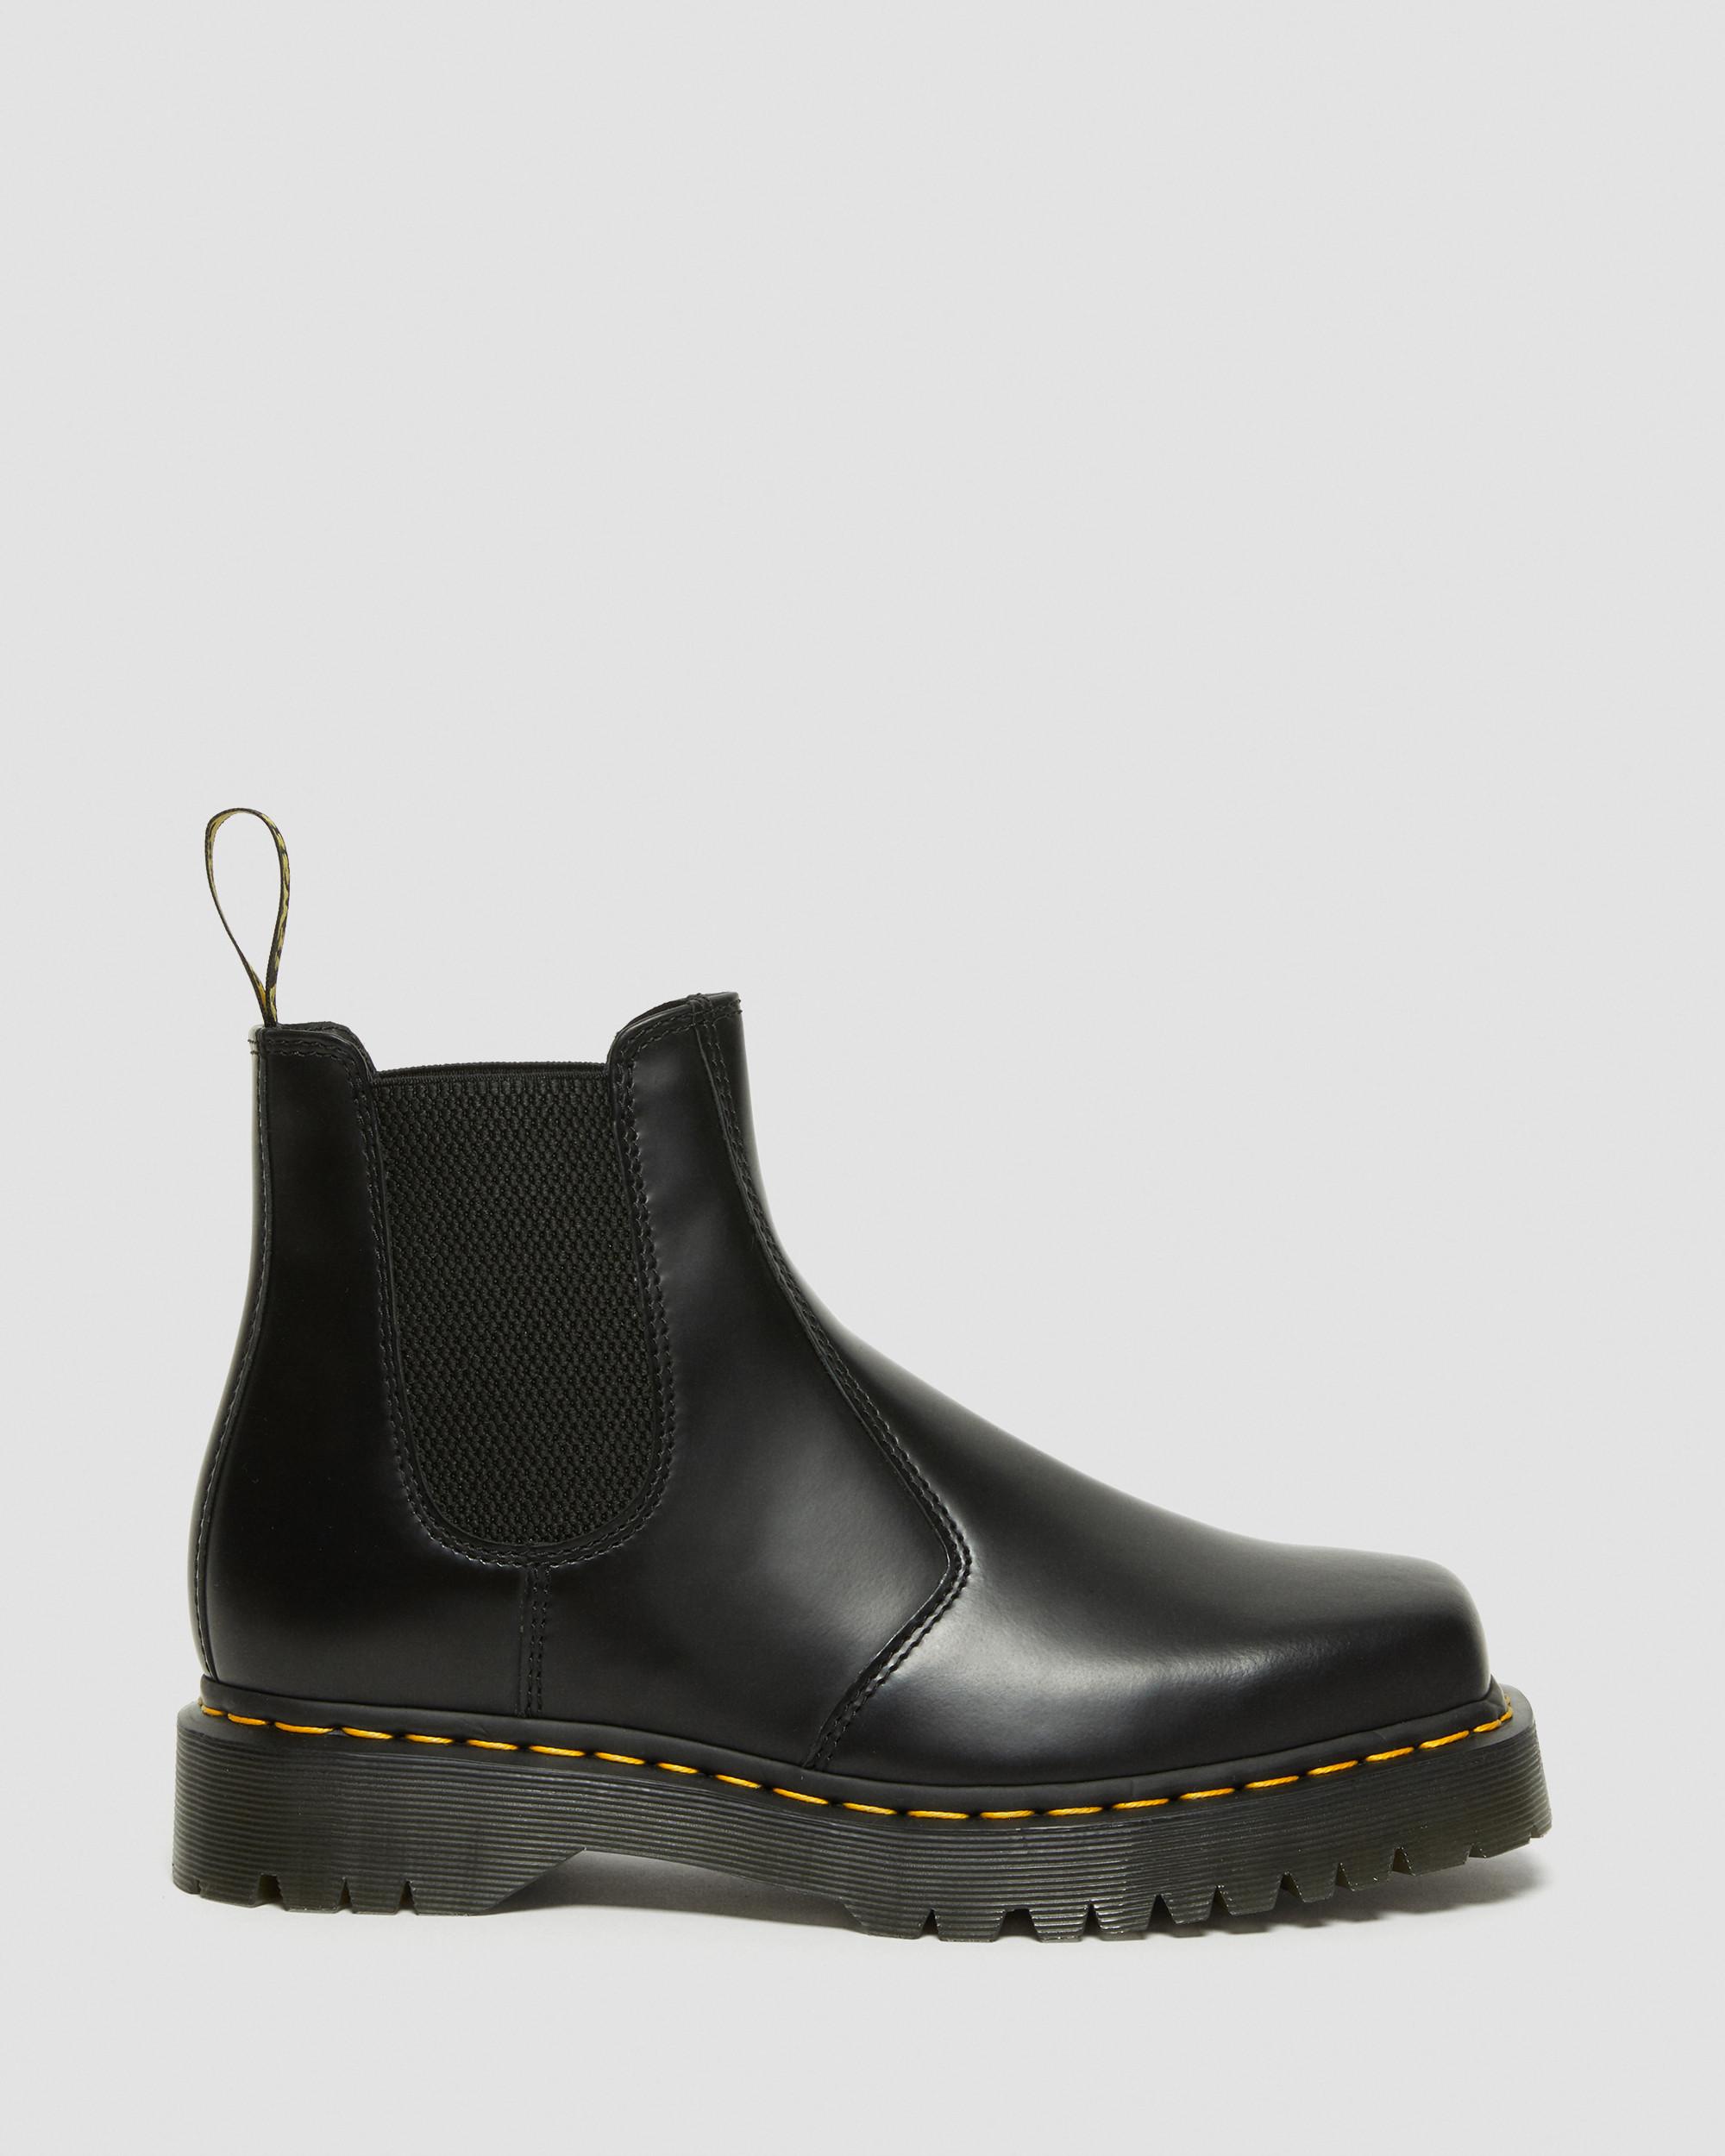 2976 Bex Squared Toe Leather Chelsea Boots in Black | Dr. Martens